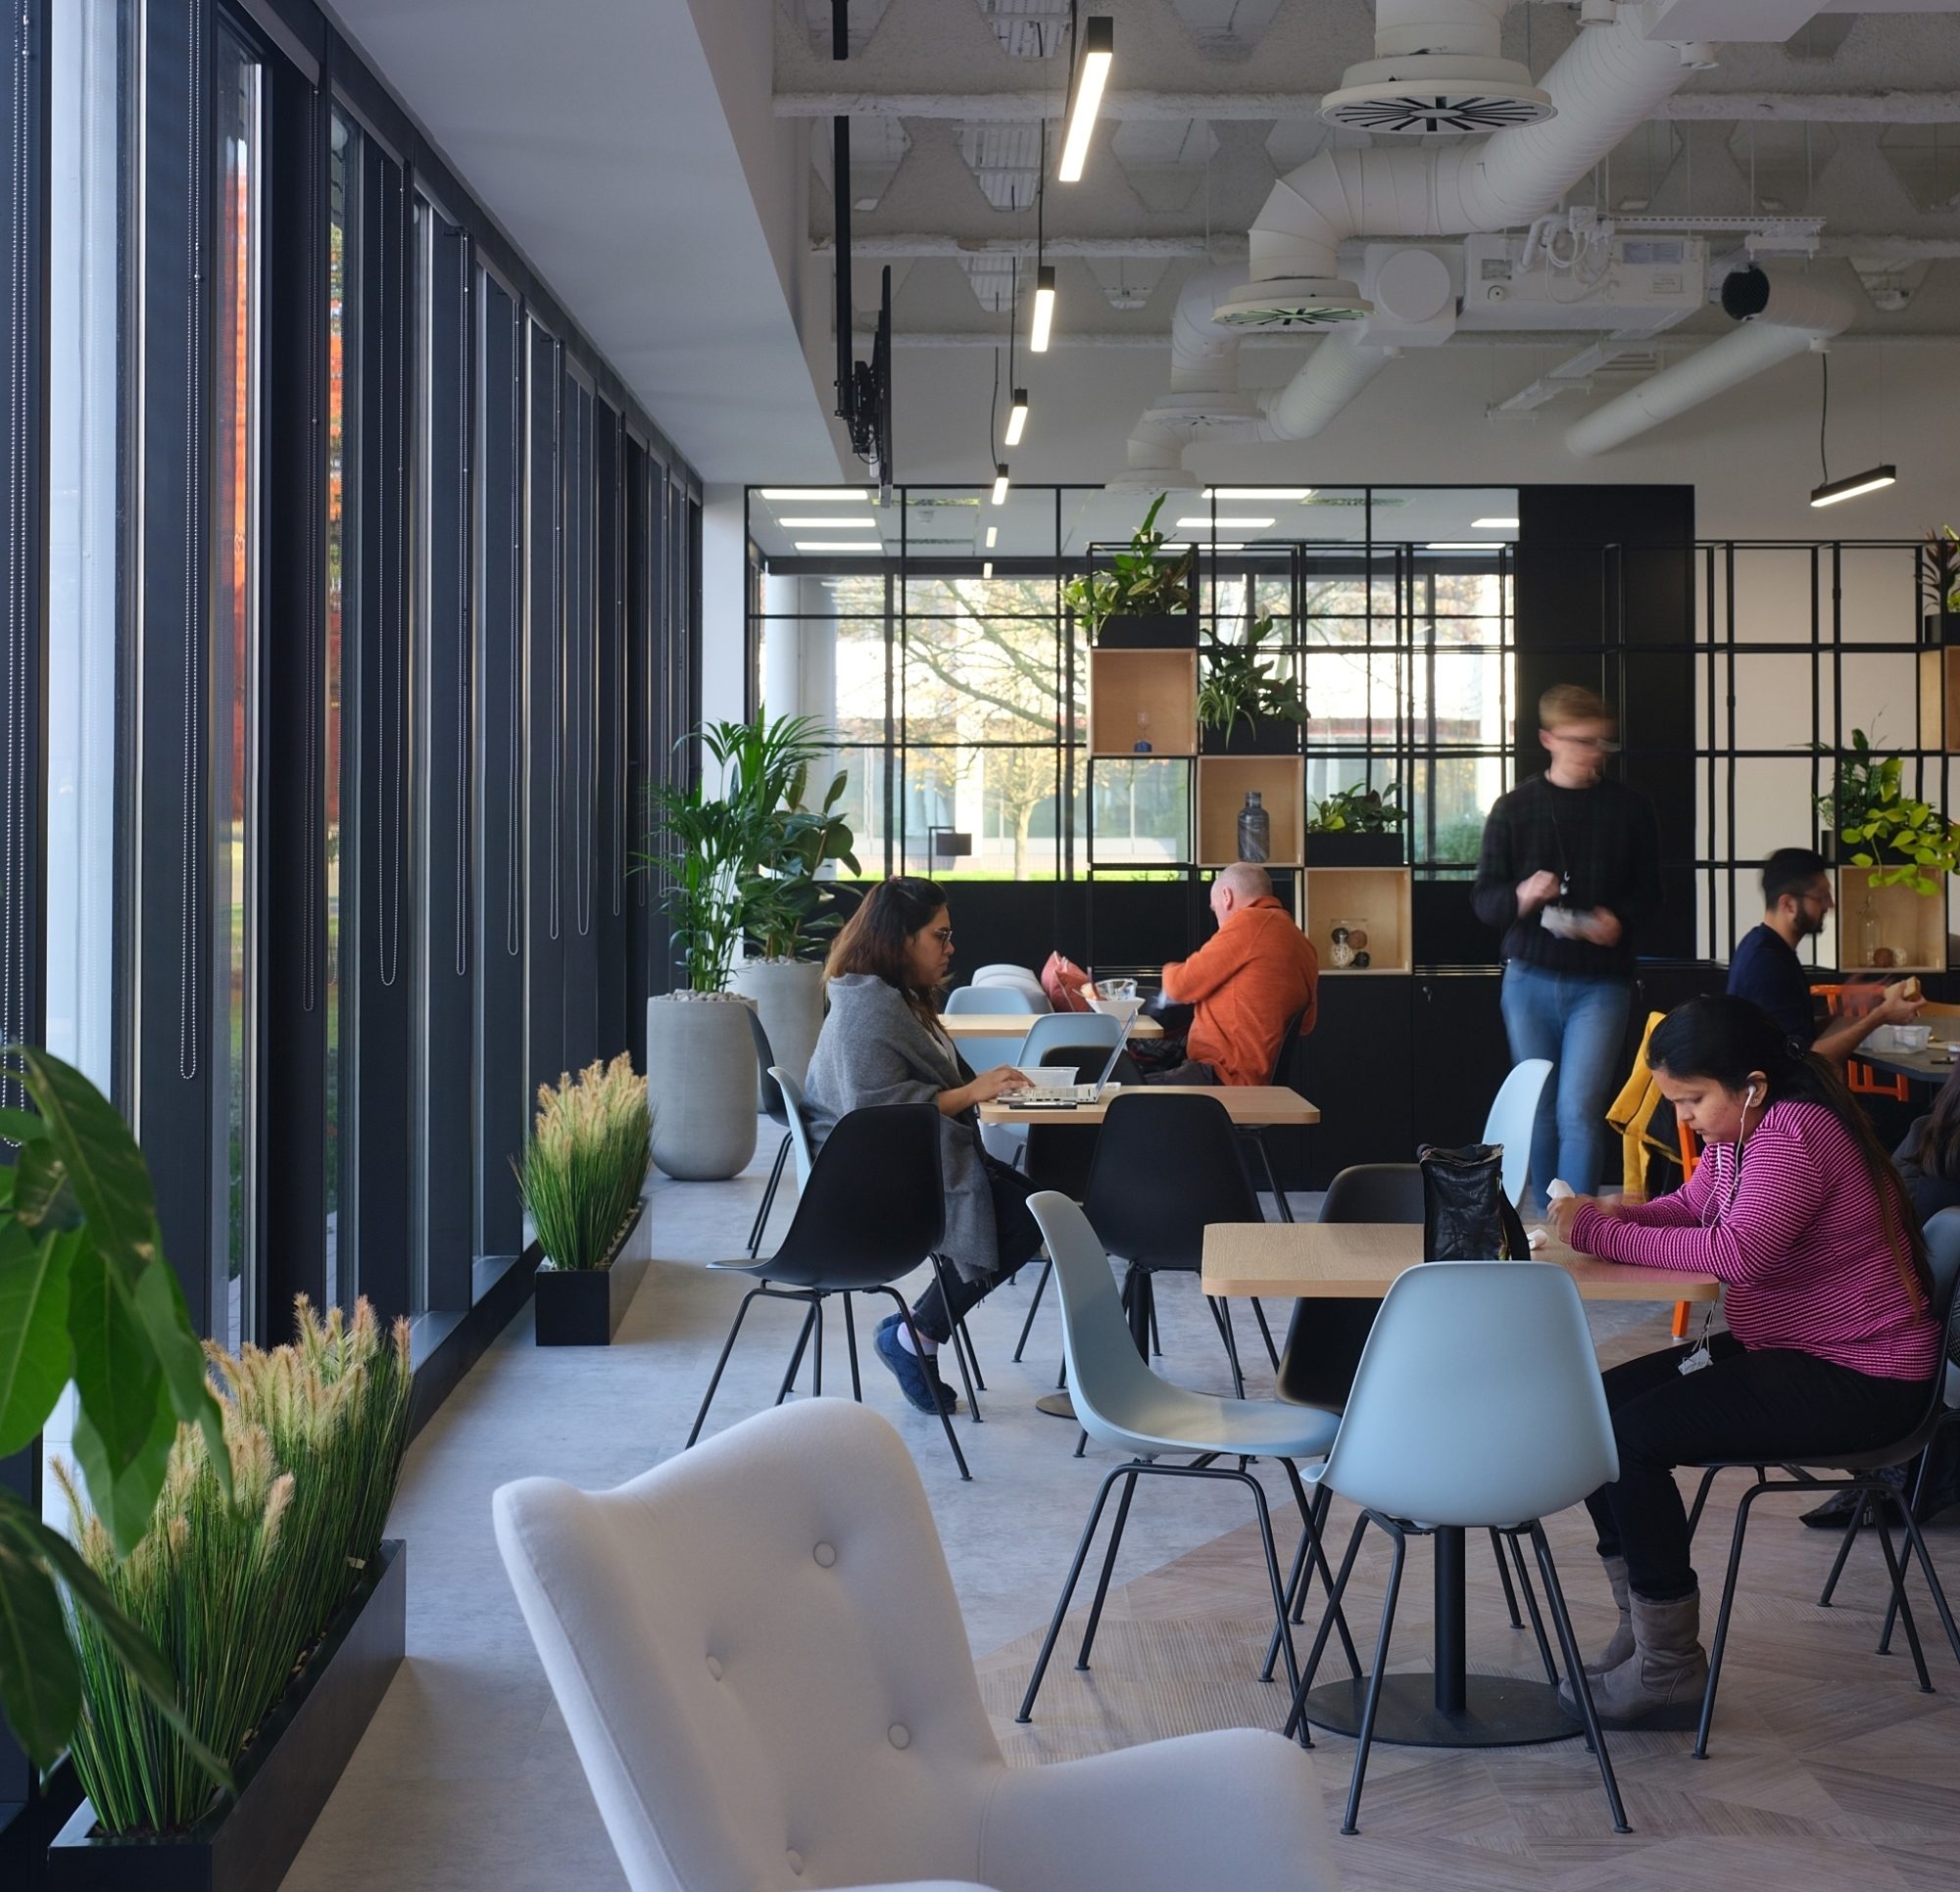 Healthy offices with flexible working, natural light and biophilia